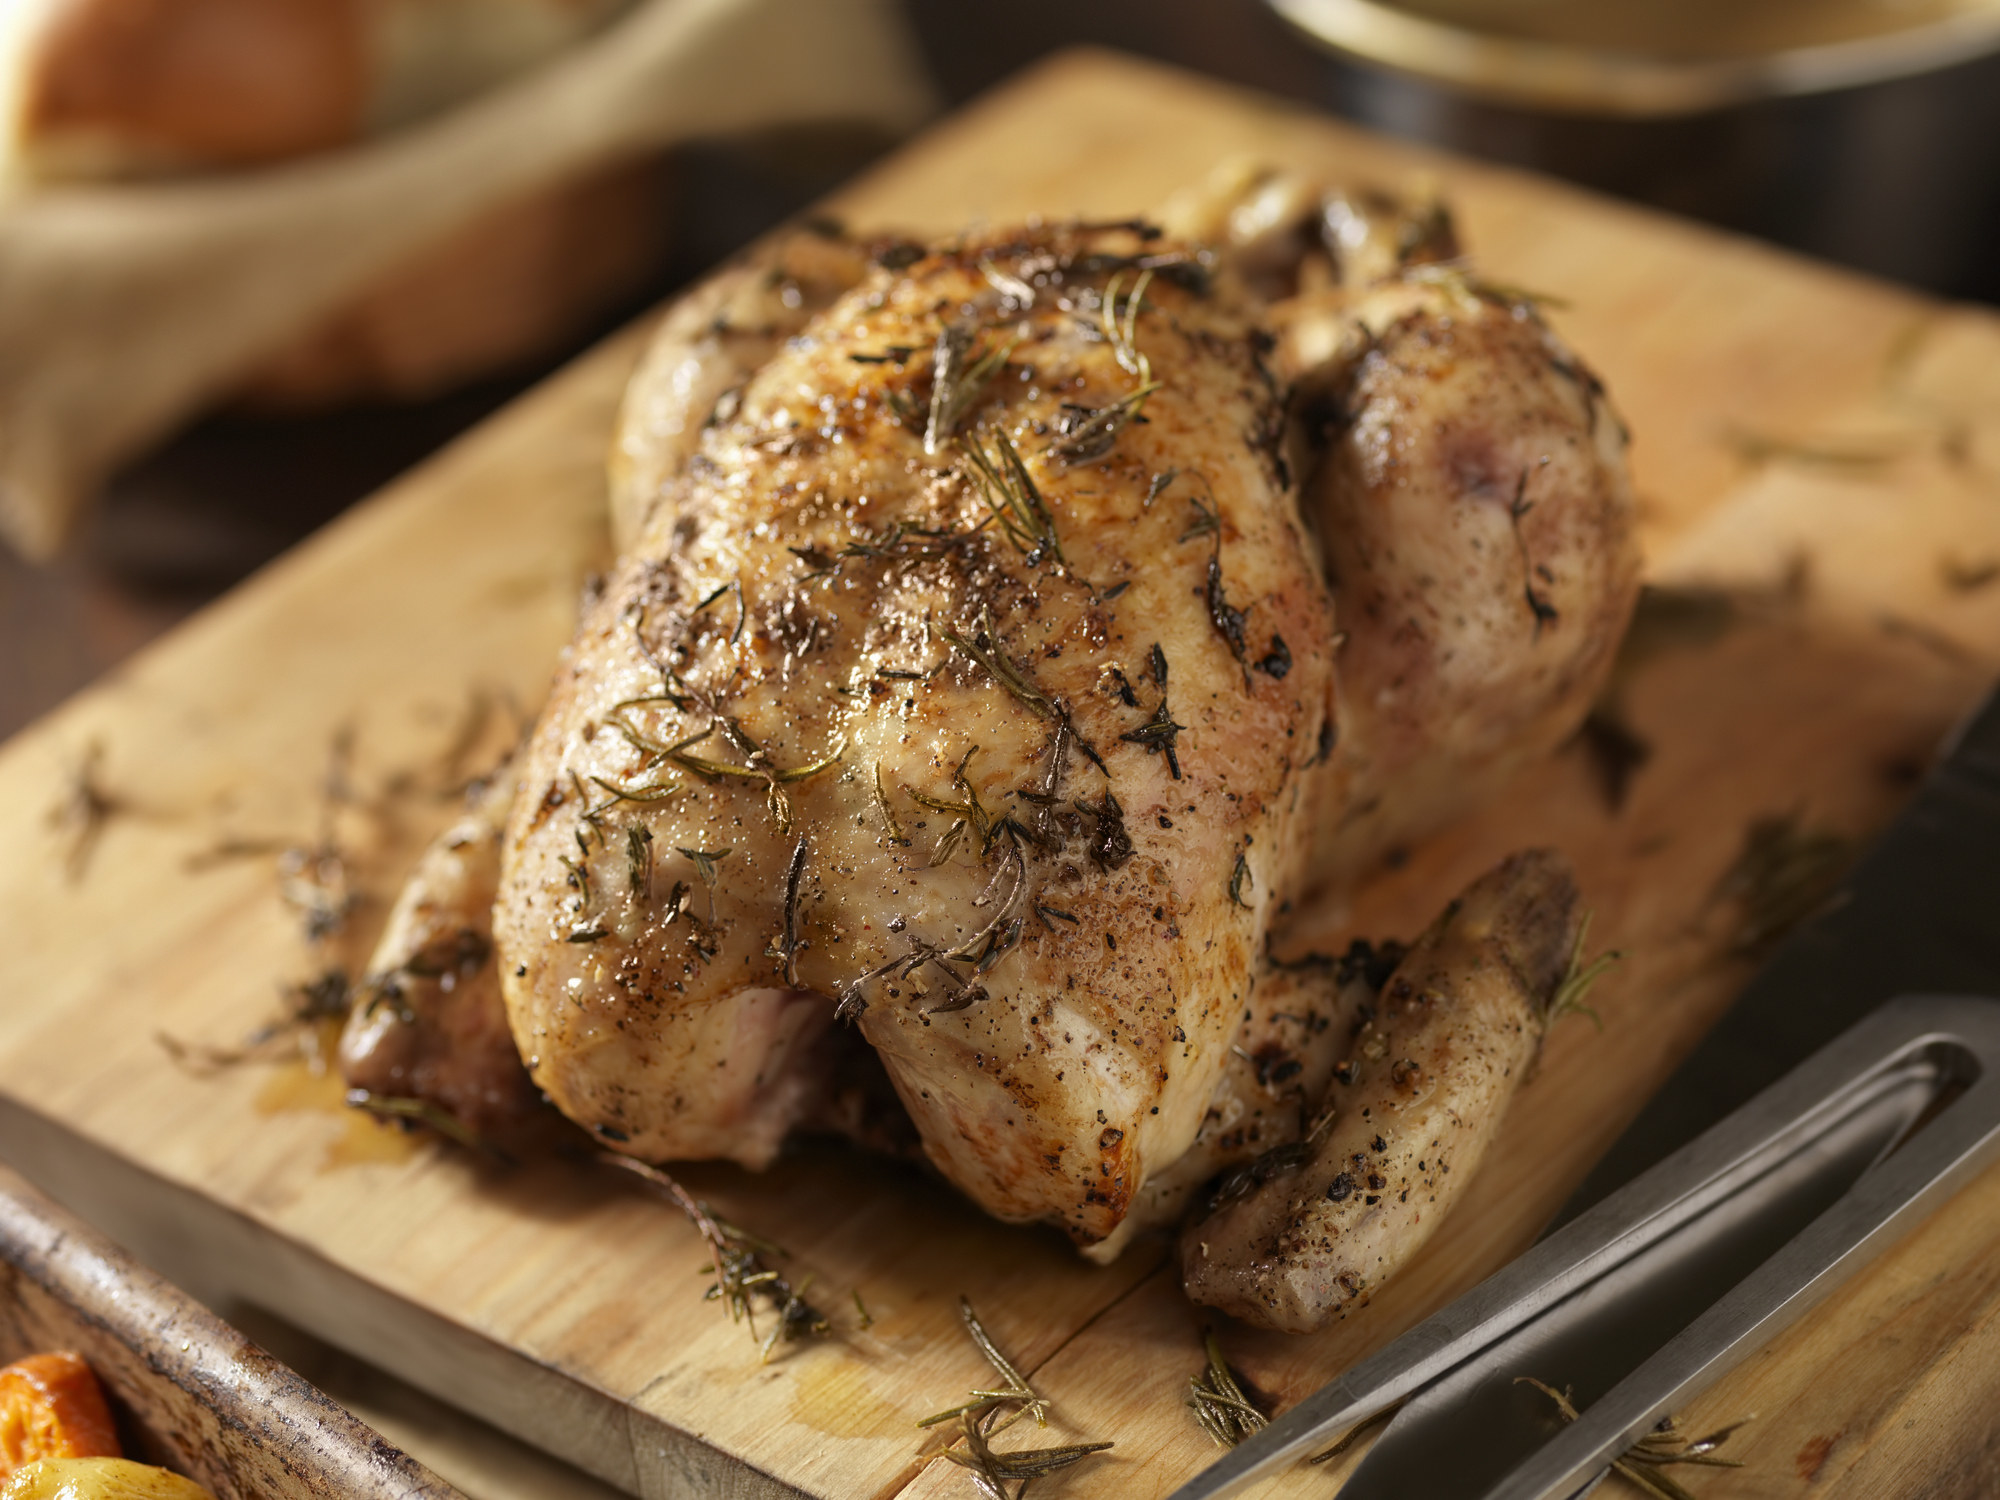 A roasted chicken with thyme